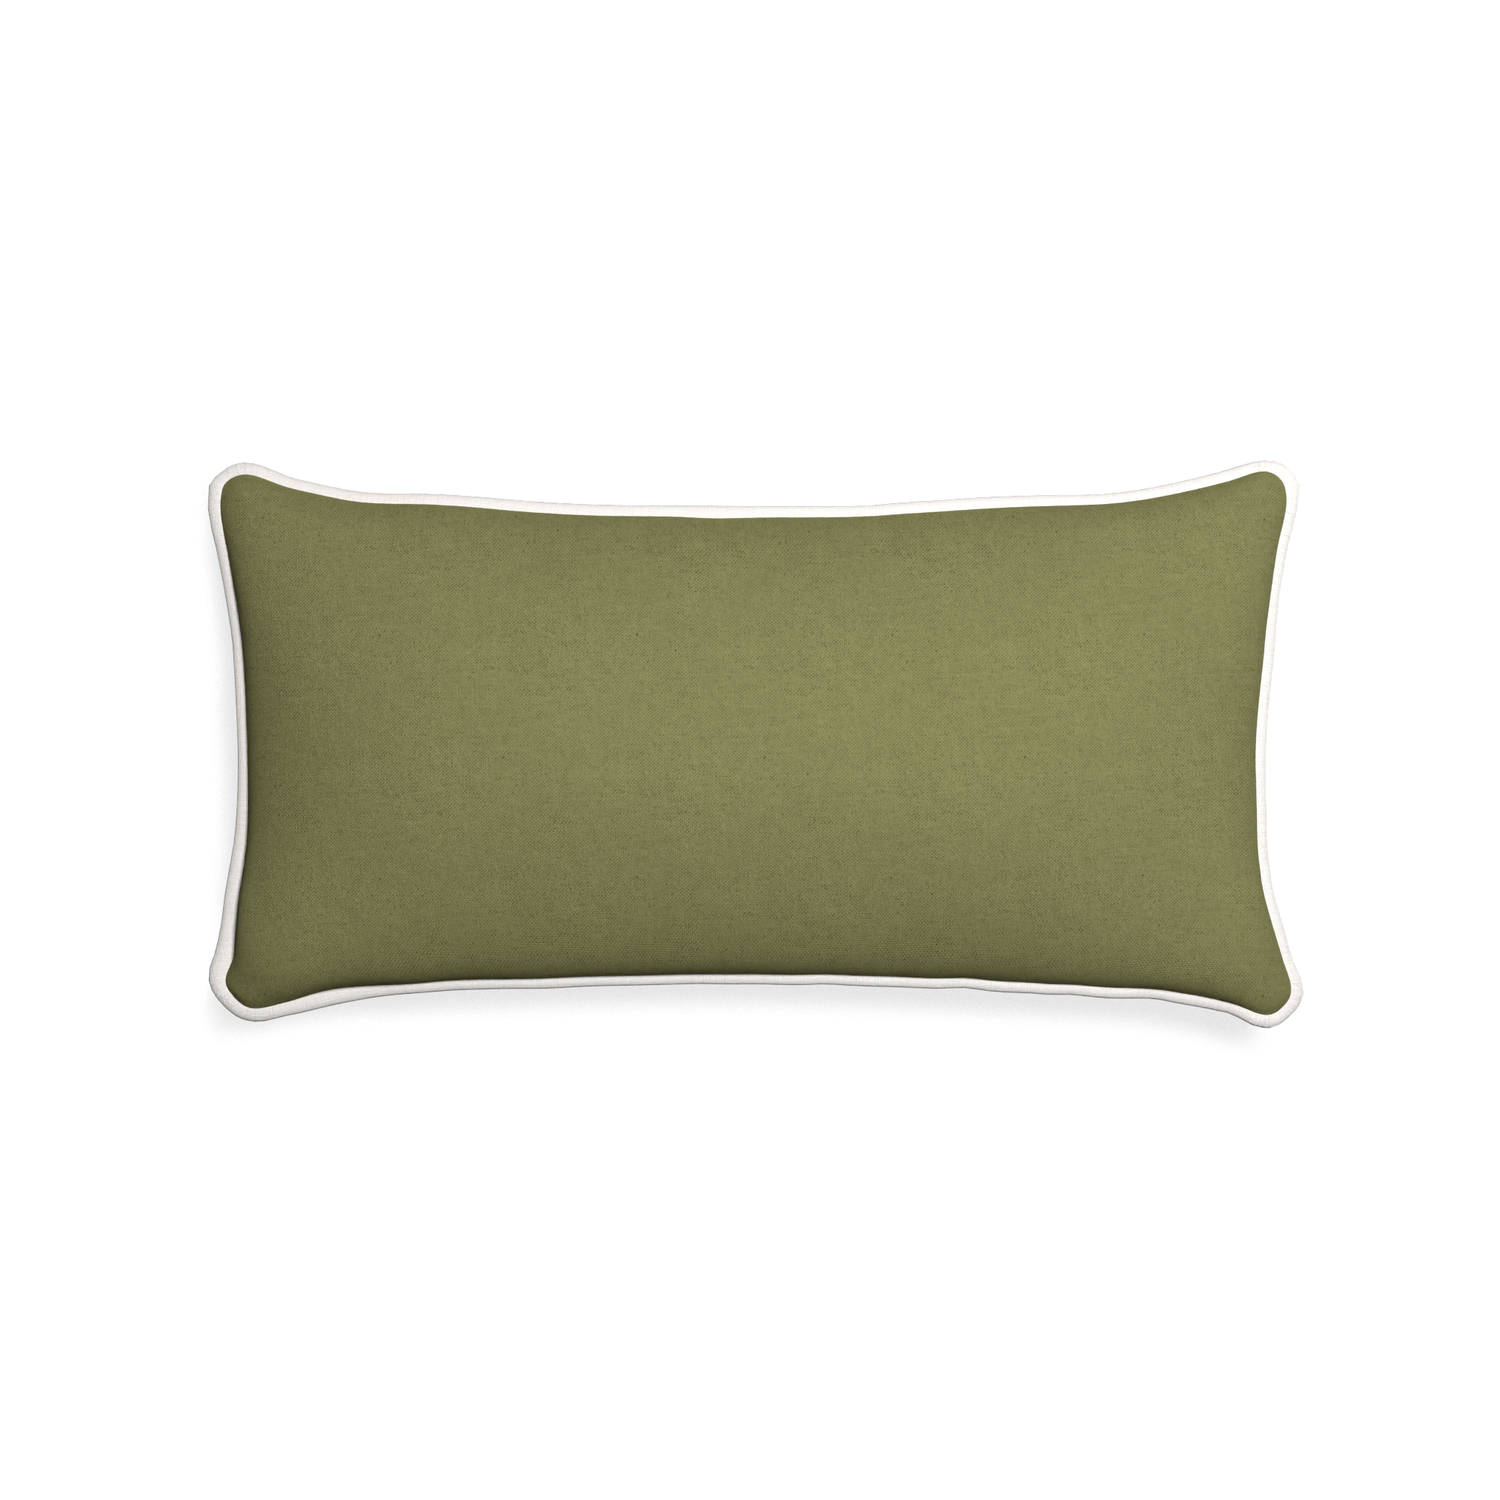 Midi-lumbar moss custom moss greenpillow with snow piping on white background